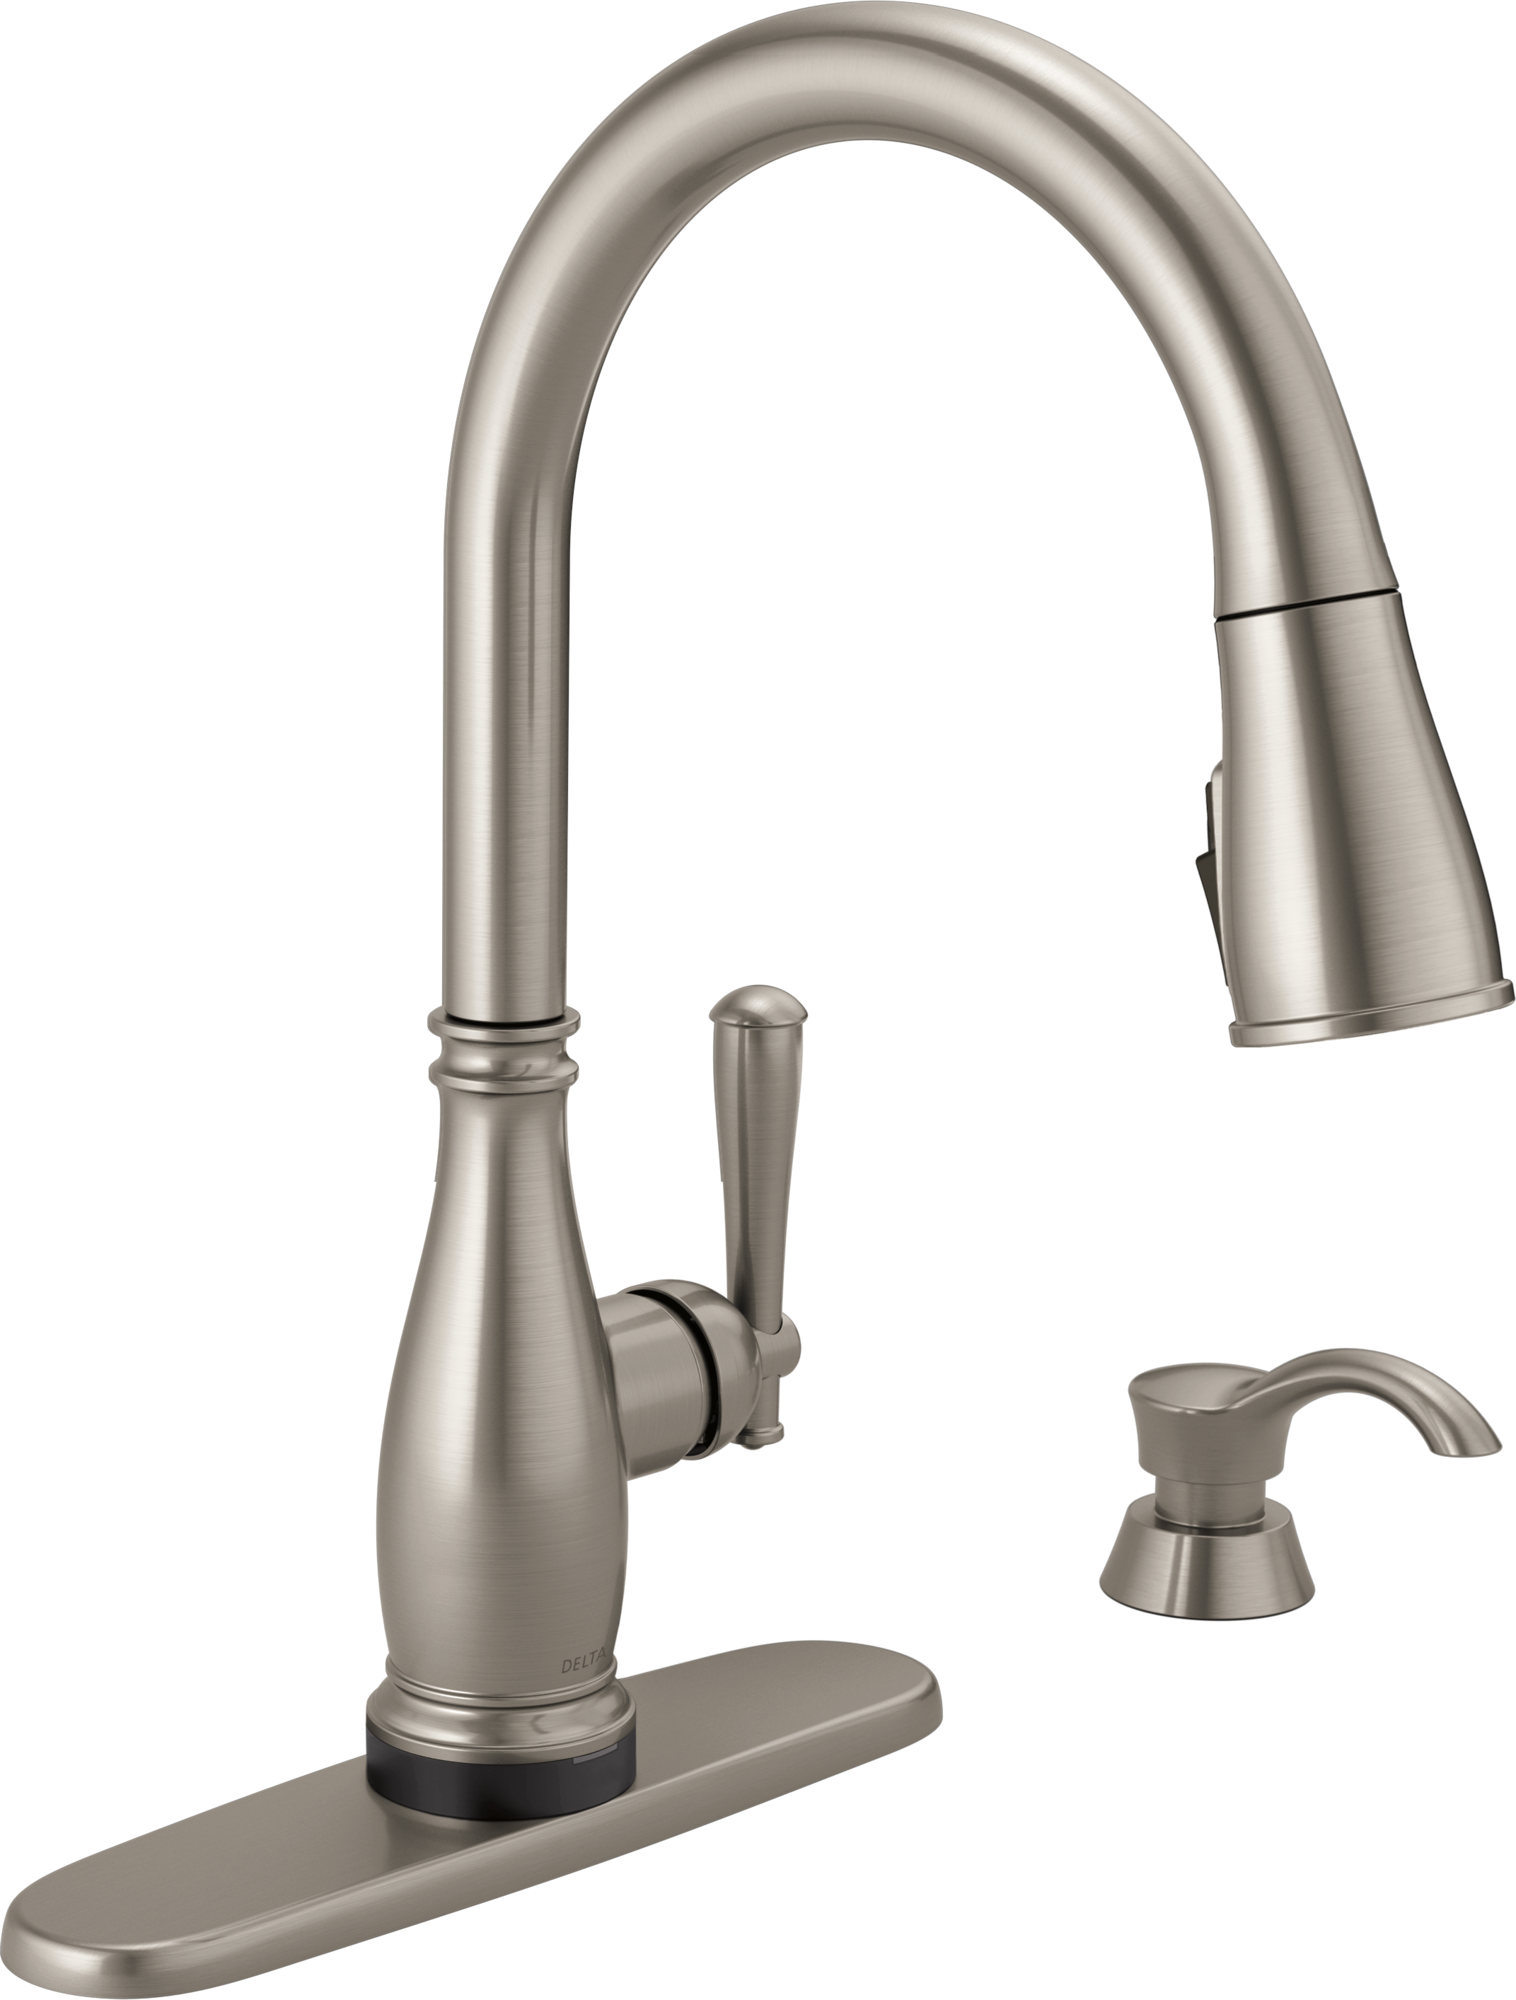 Delta Charmaine Touch2O Kitchen Faucet Certified Refurbished